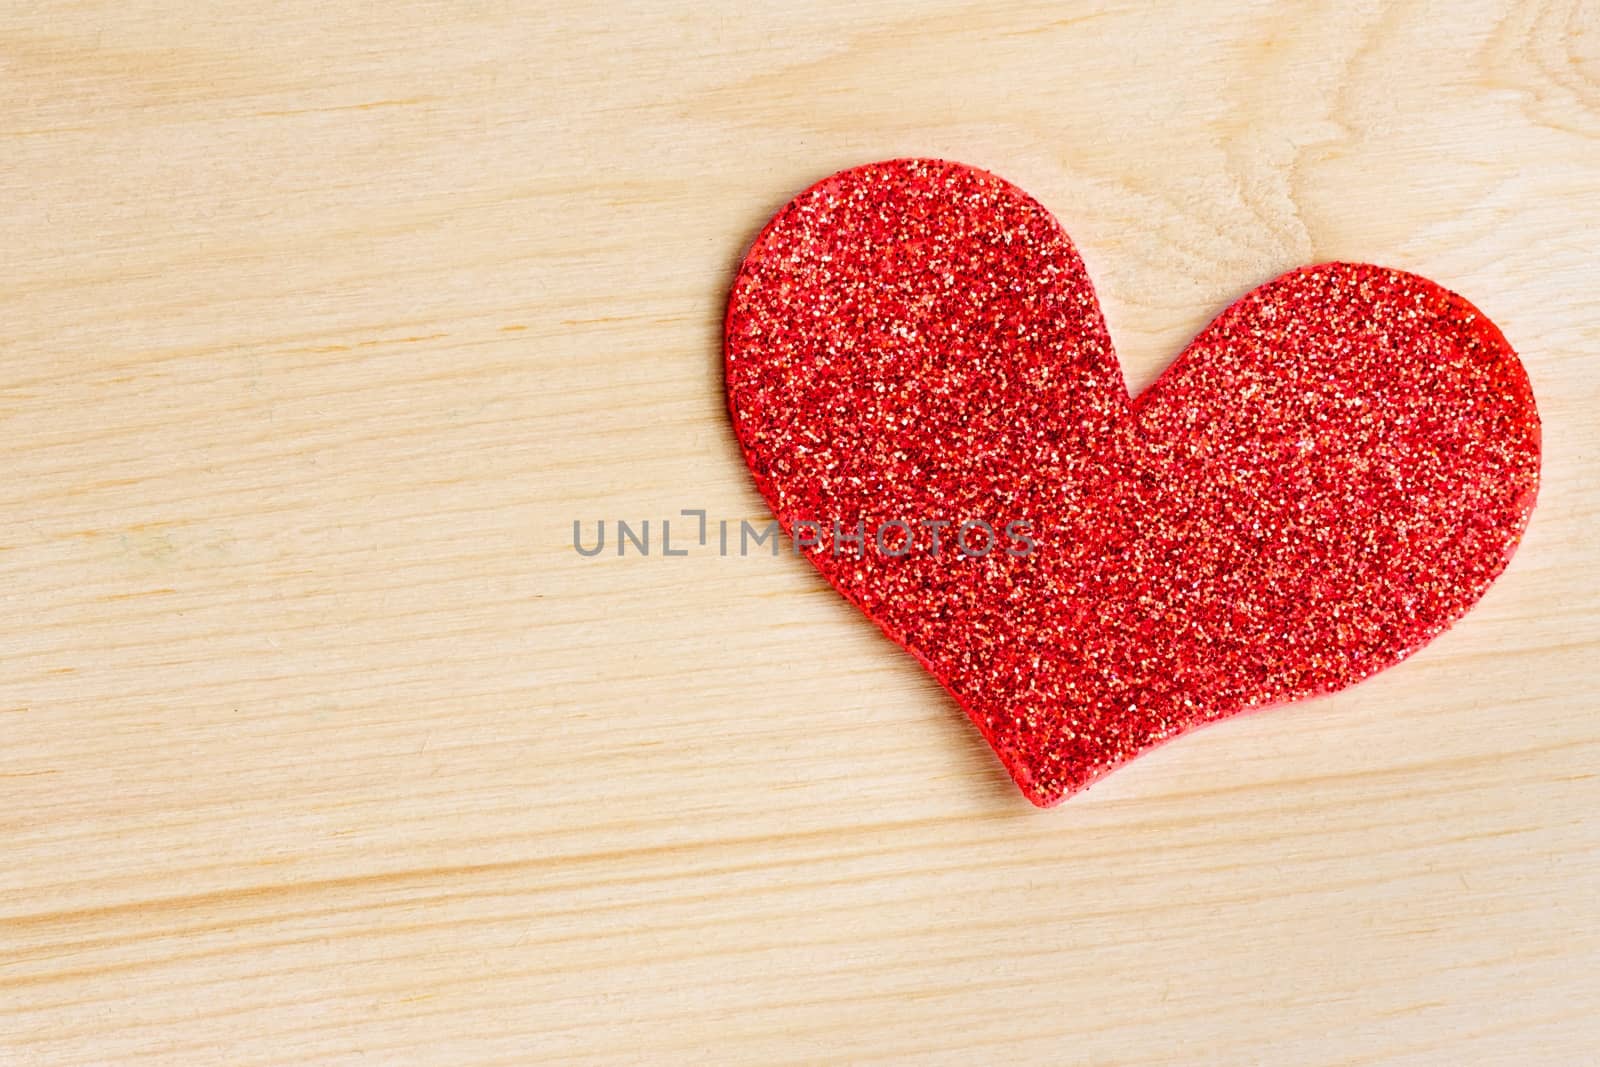 one decorative red heart on wood background with space for text, concept of love